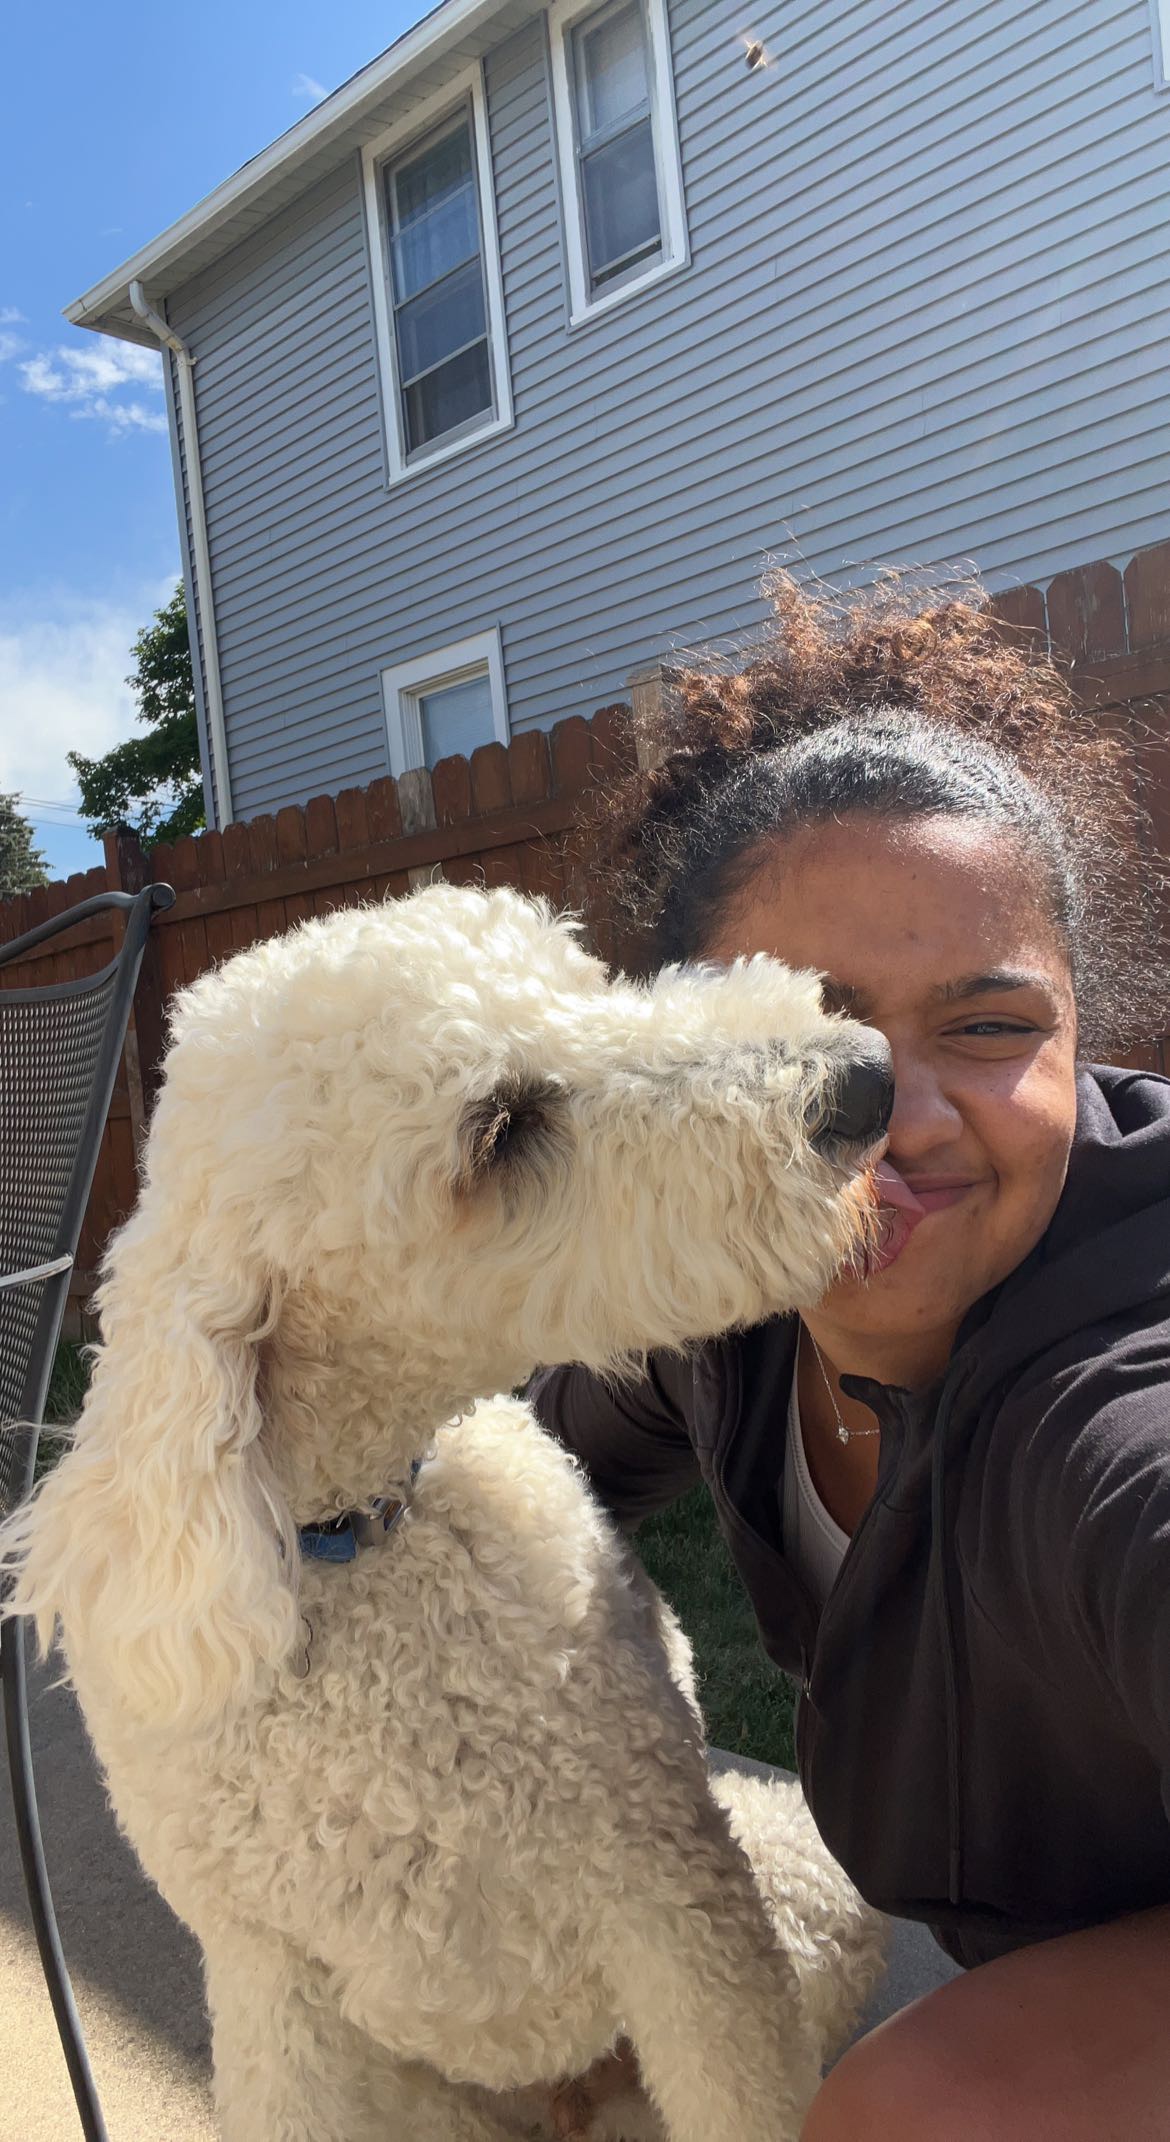 African American woman receiving a nose lick from a white dog.